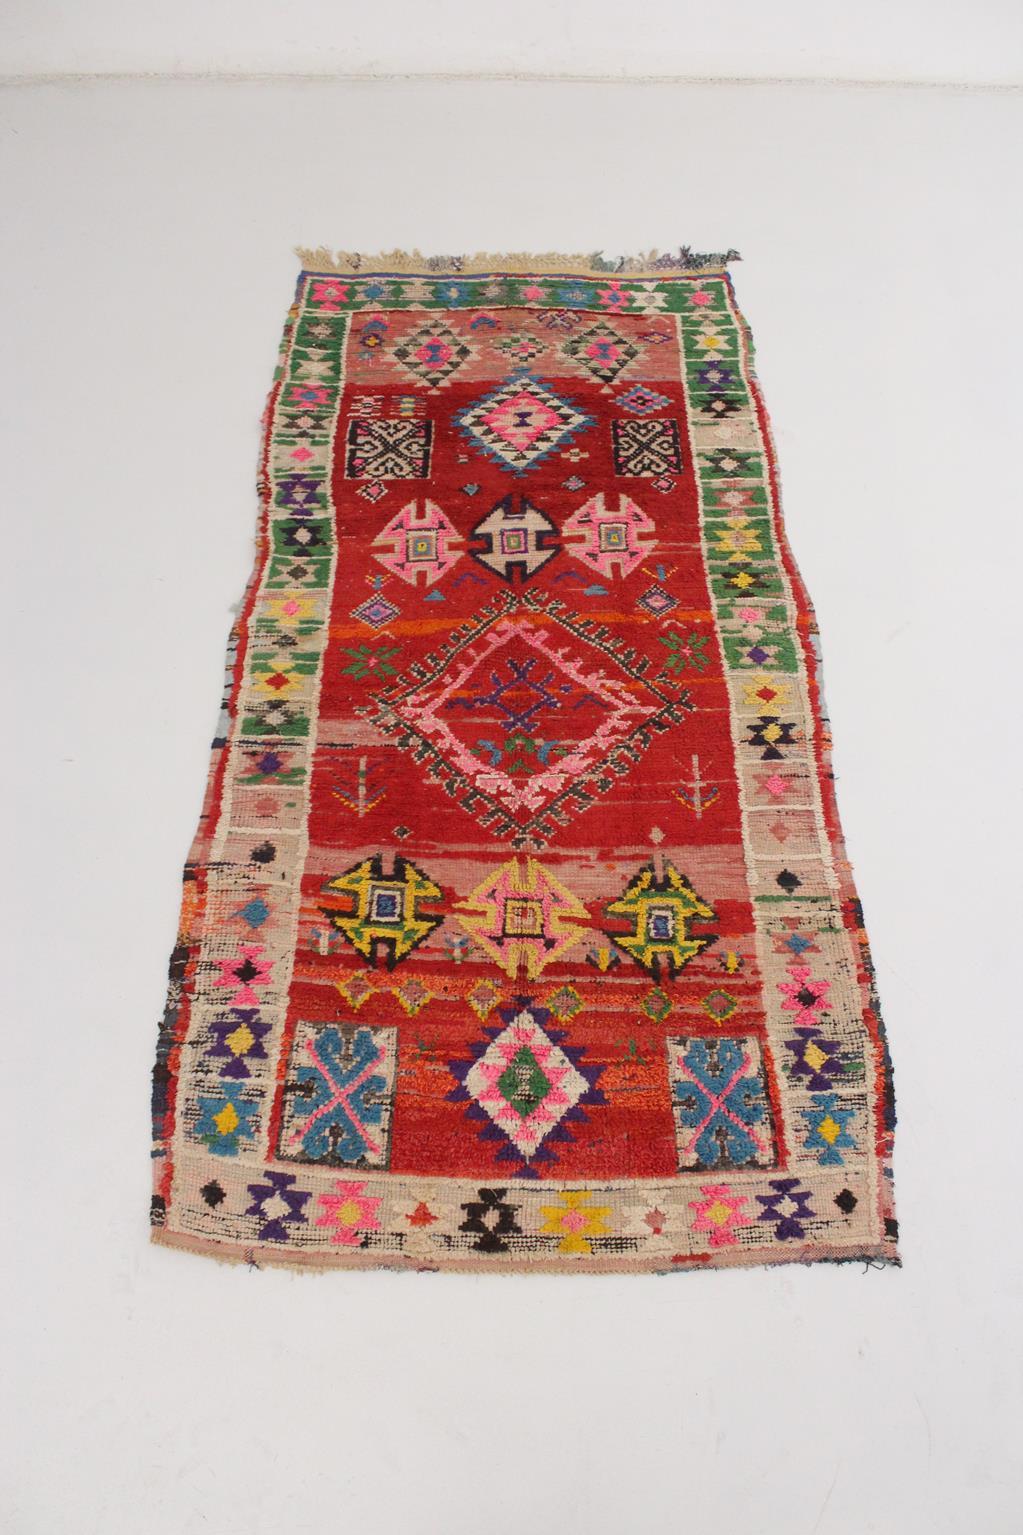 How lovely is this one!! Such a sweet and fun vintage rug with bright colors and traditional berber designs all over it! Main colors are a bright red and pink with pops of blue, purple, cream, black, yellow, green...

Its dimensions make it the